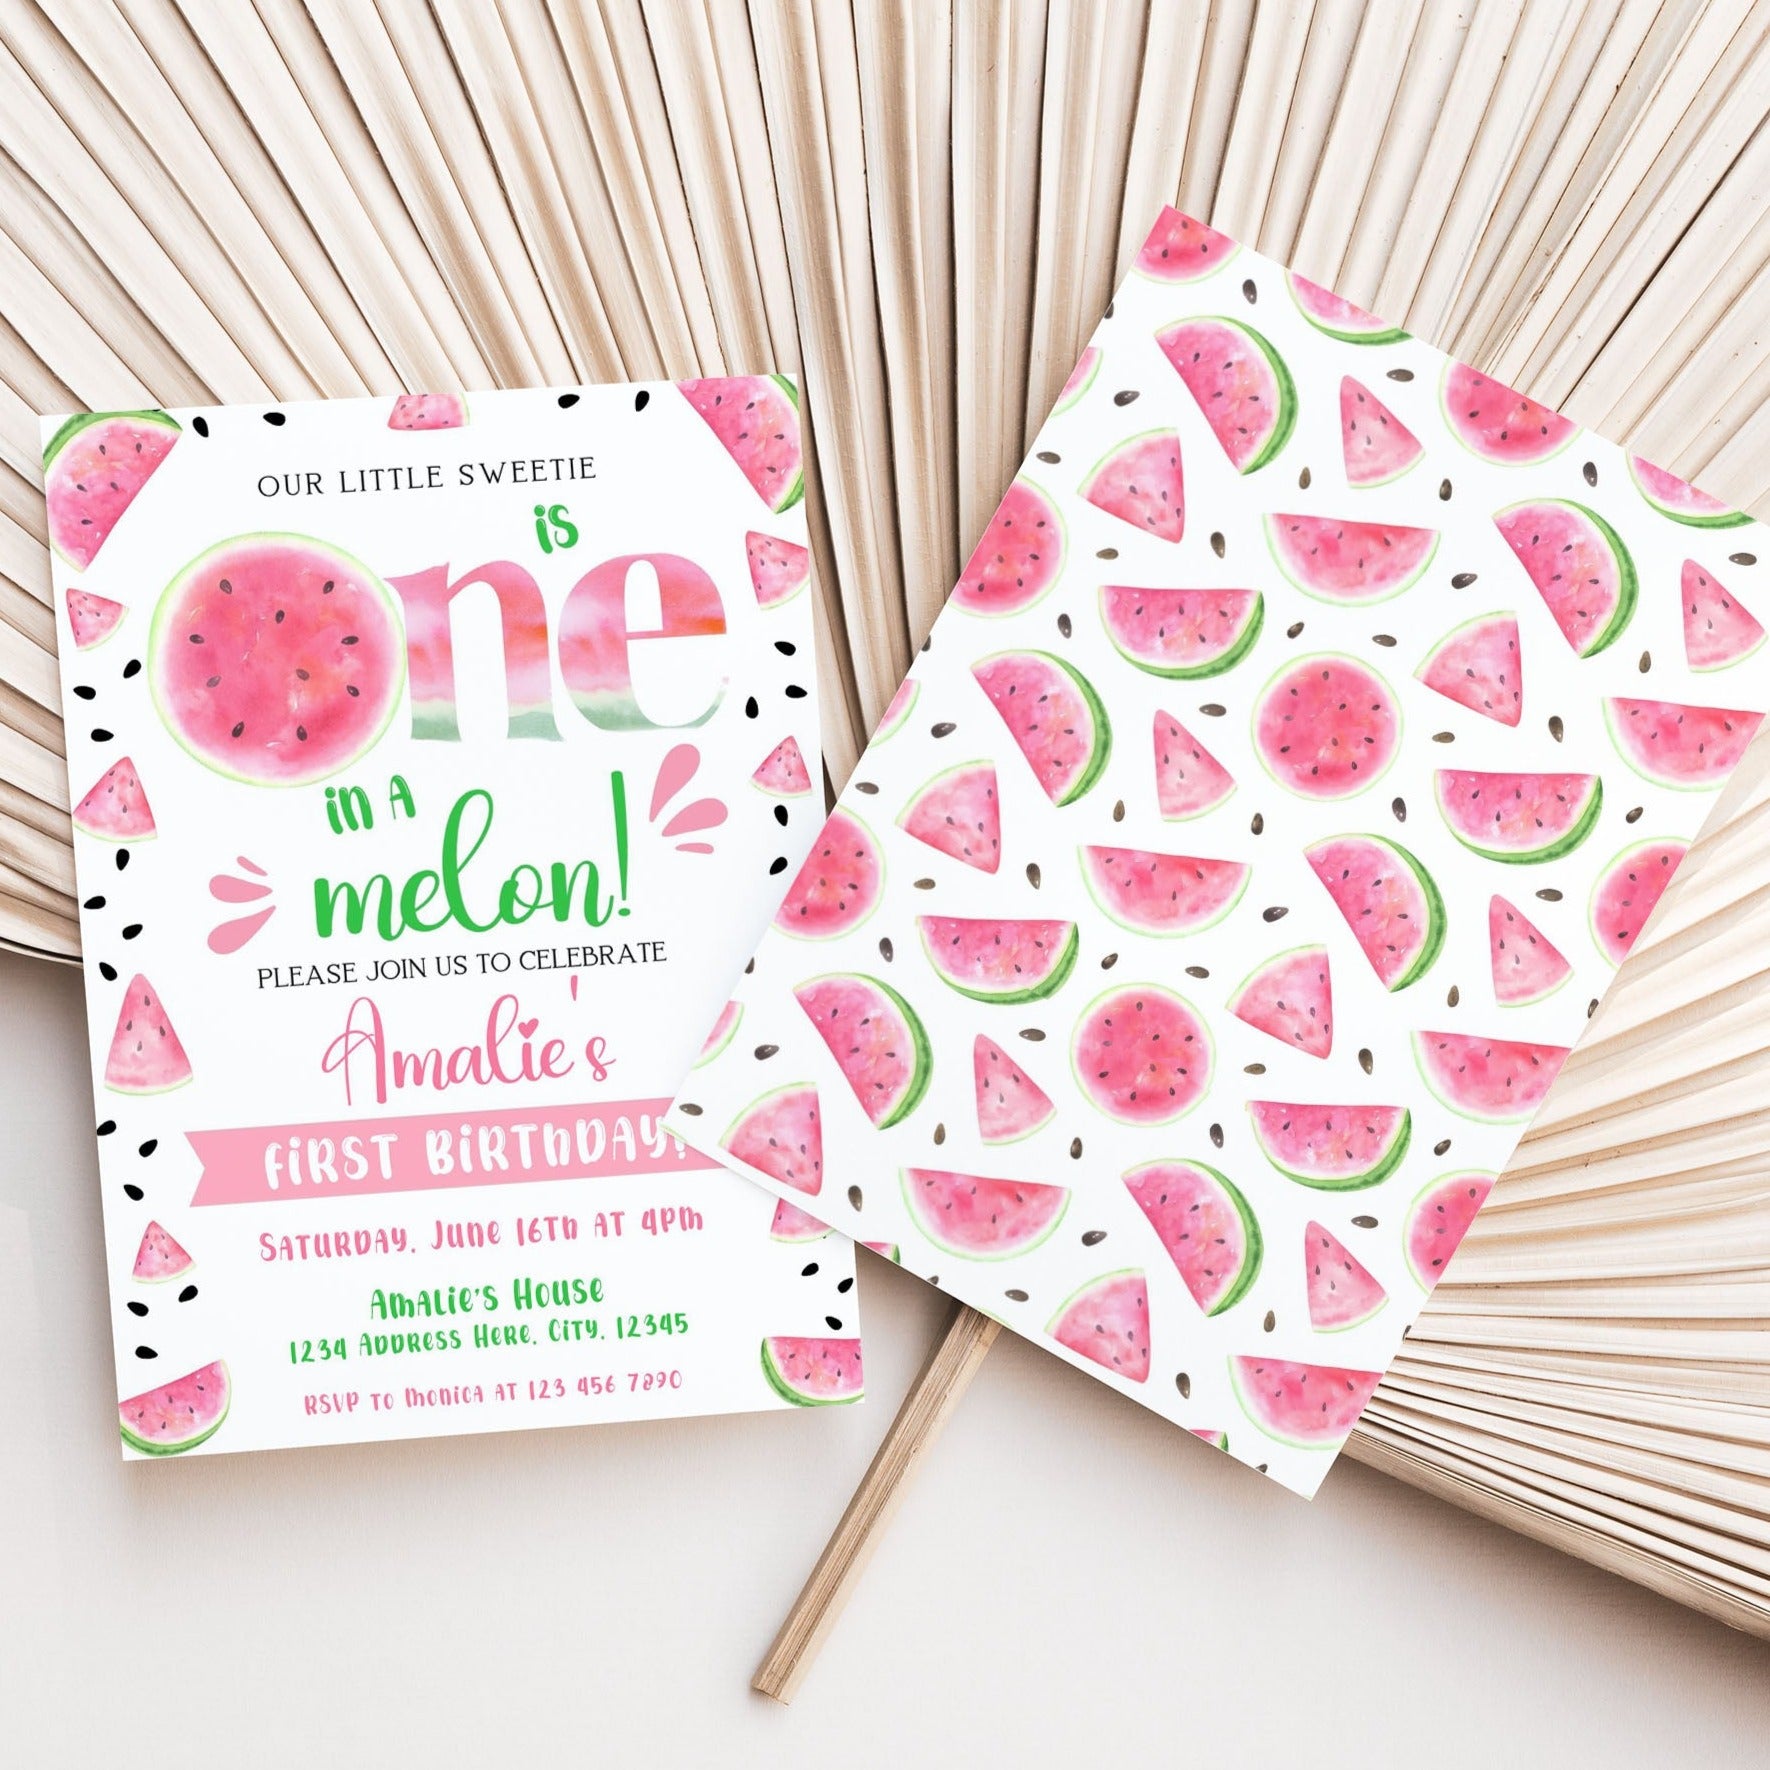 Charming Watermelon Design Invitation for Your Child's First Birthday